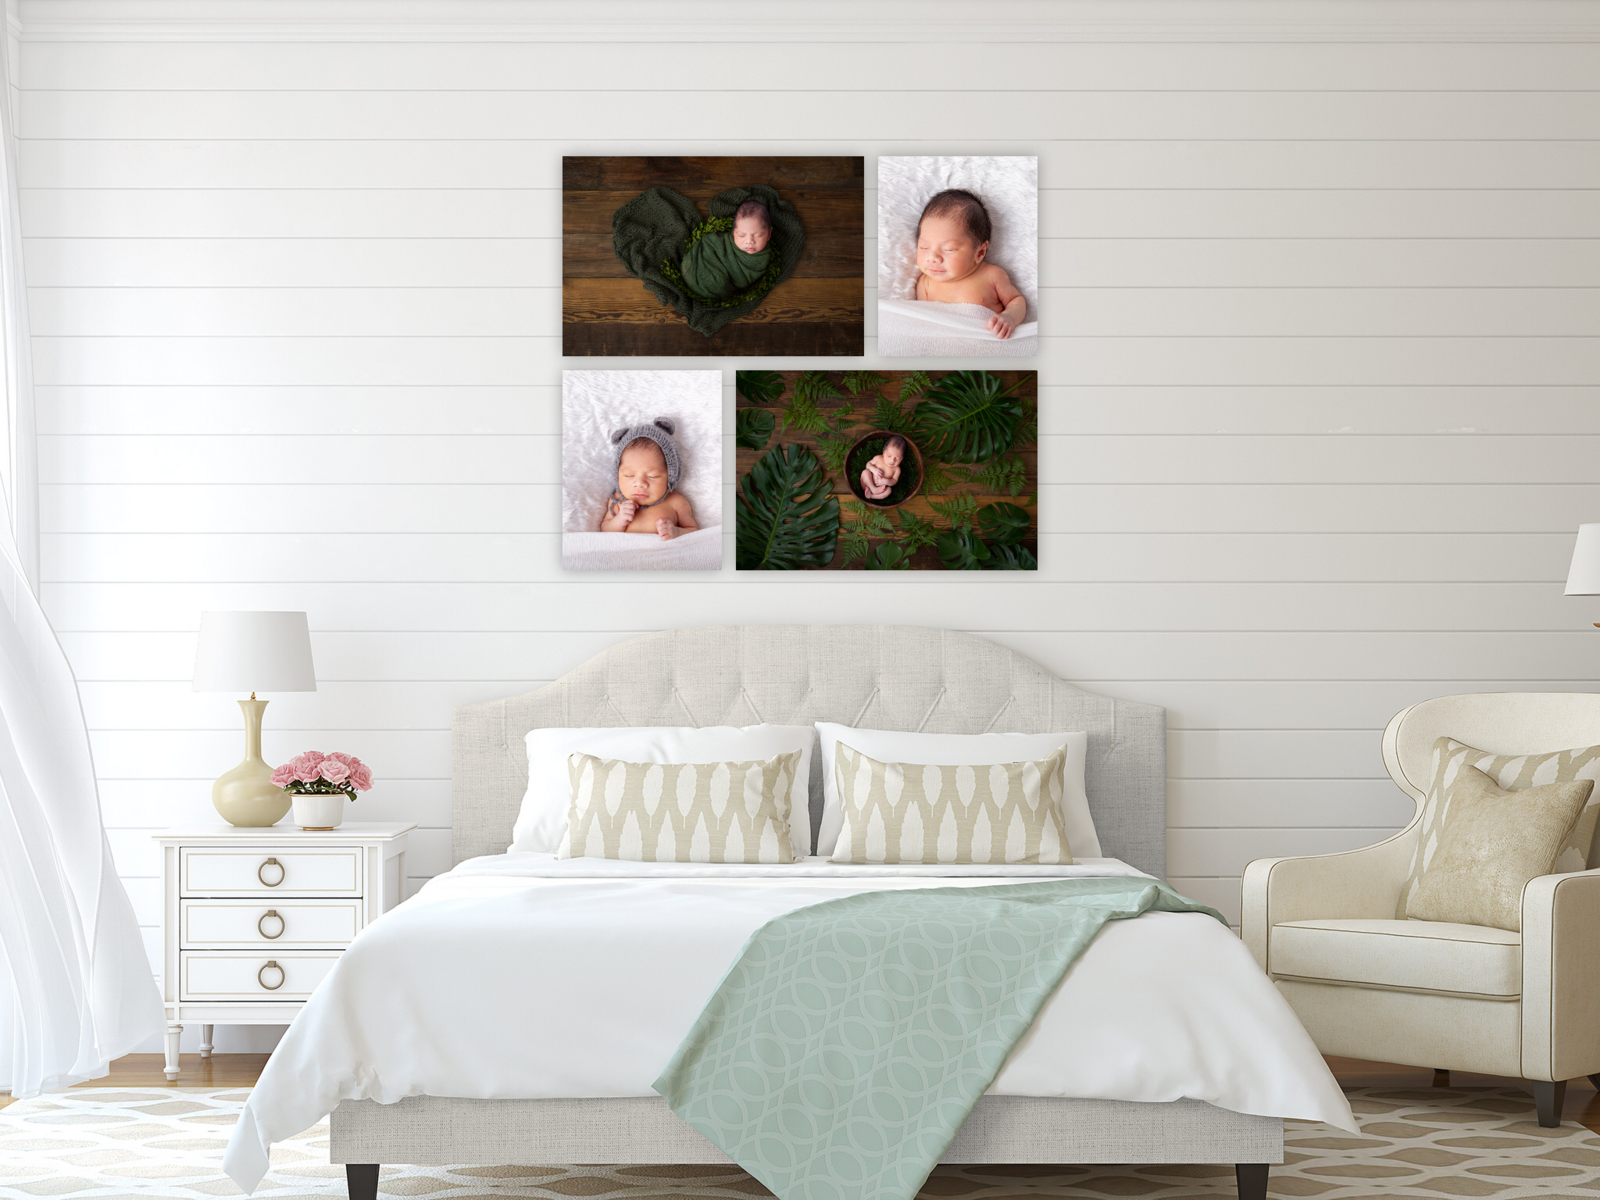 A collection of canvases of a newborn baby boy in green  hung above bed- accent photography